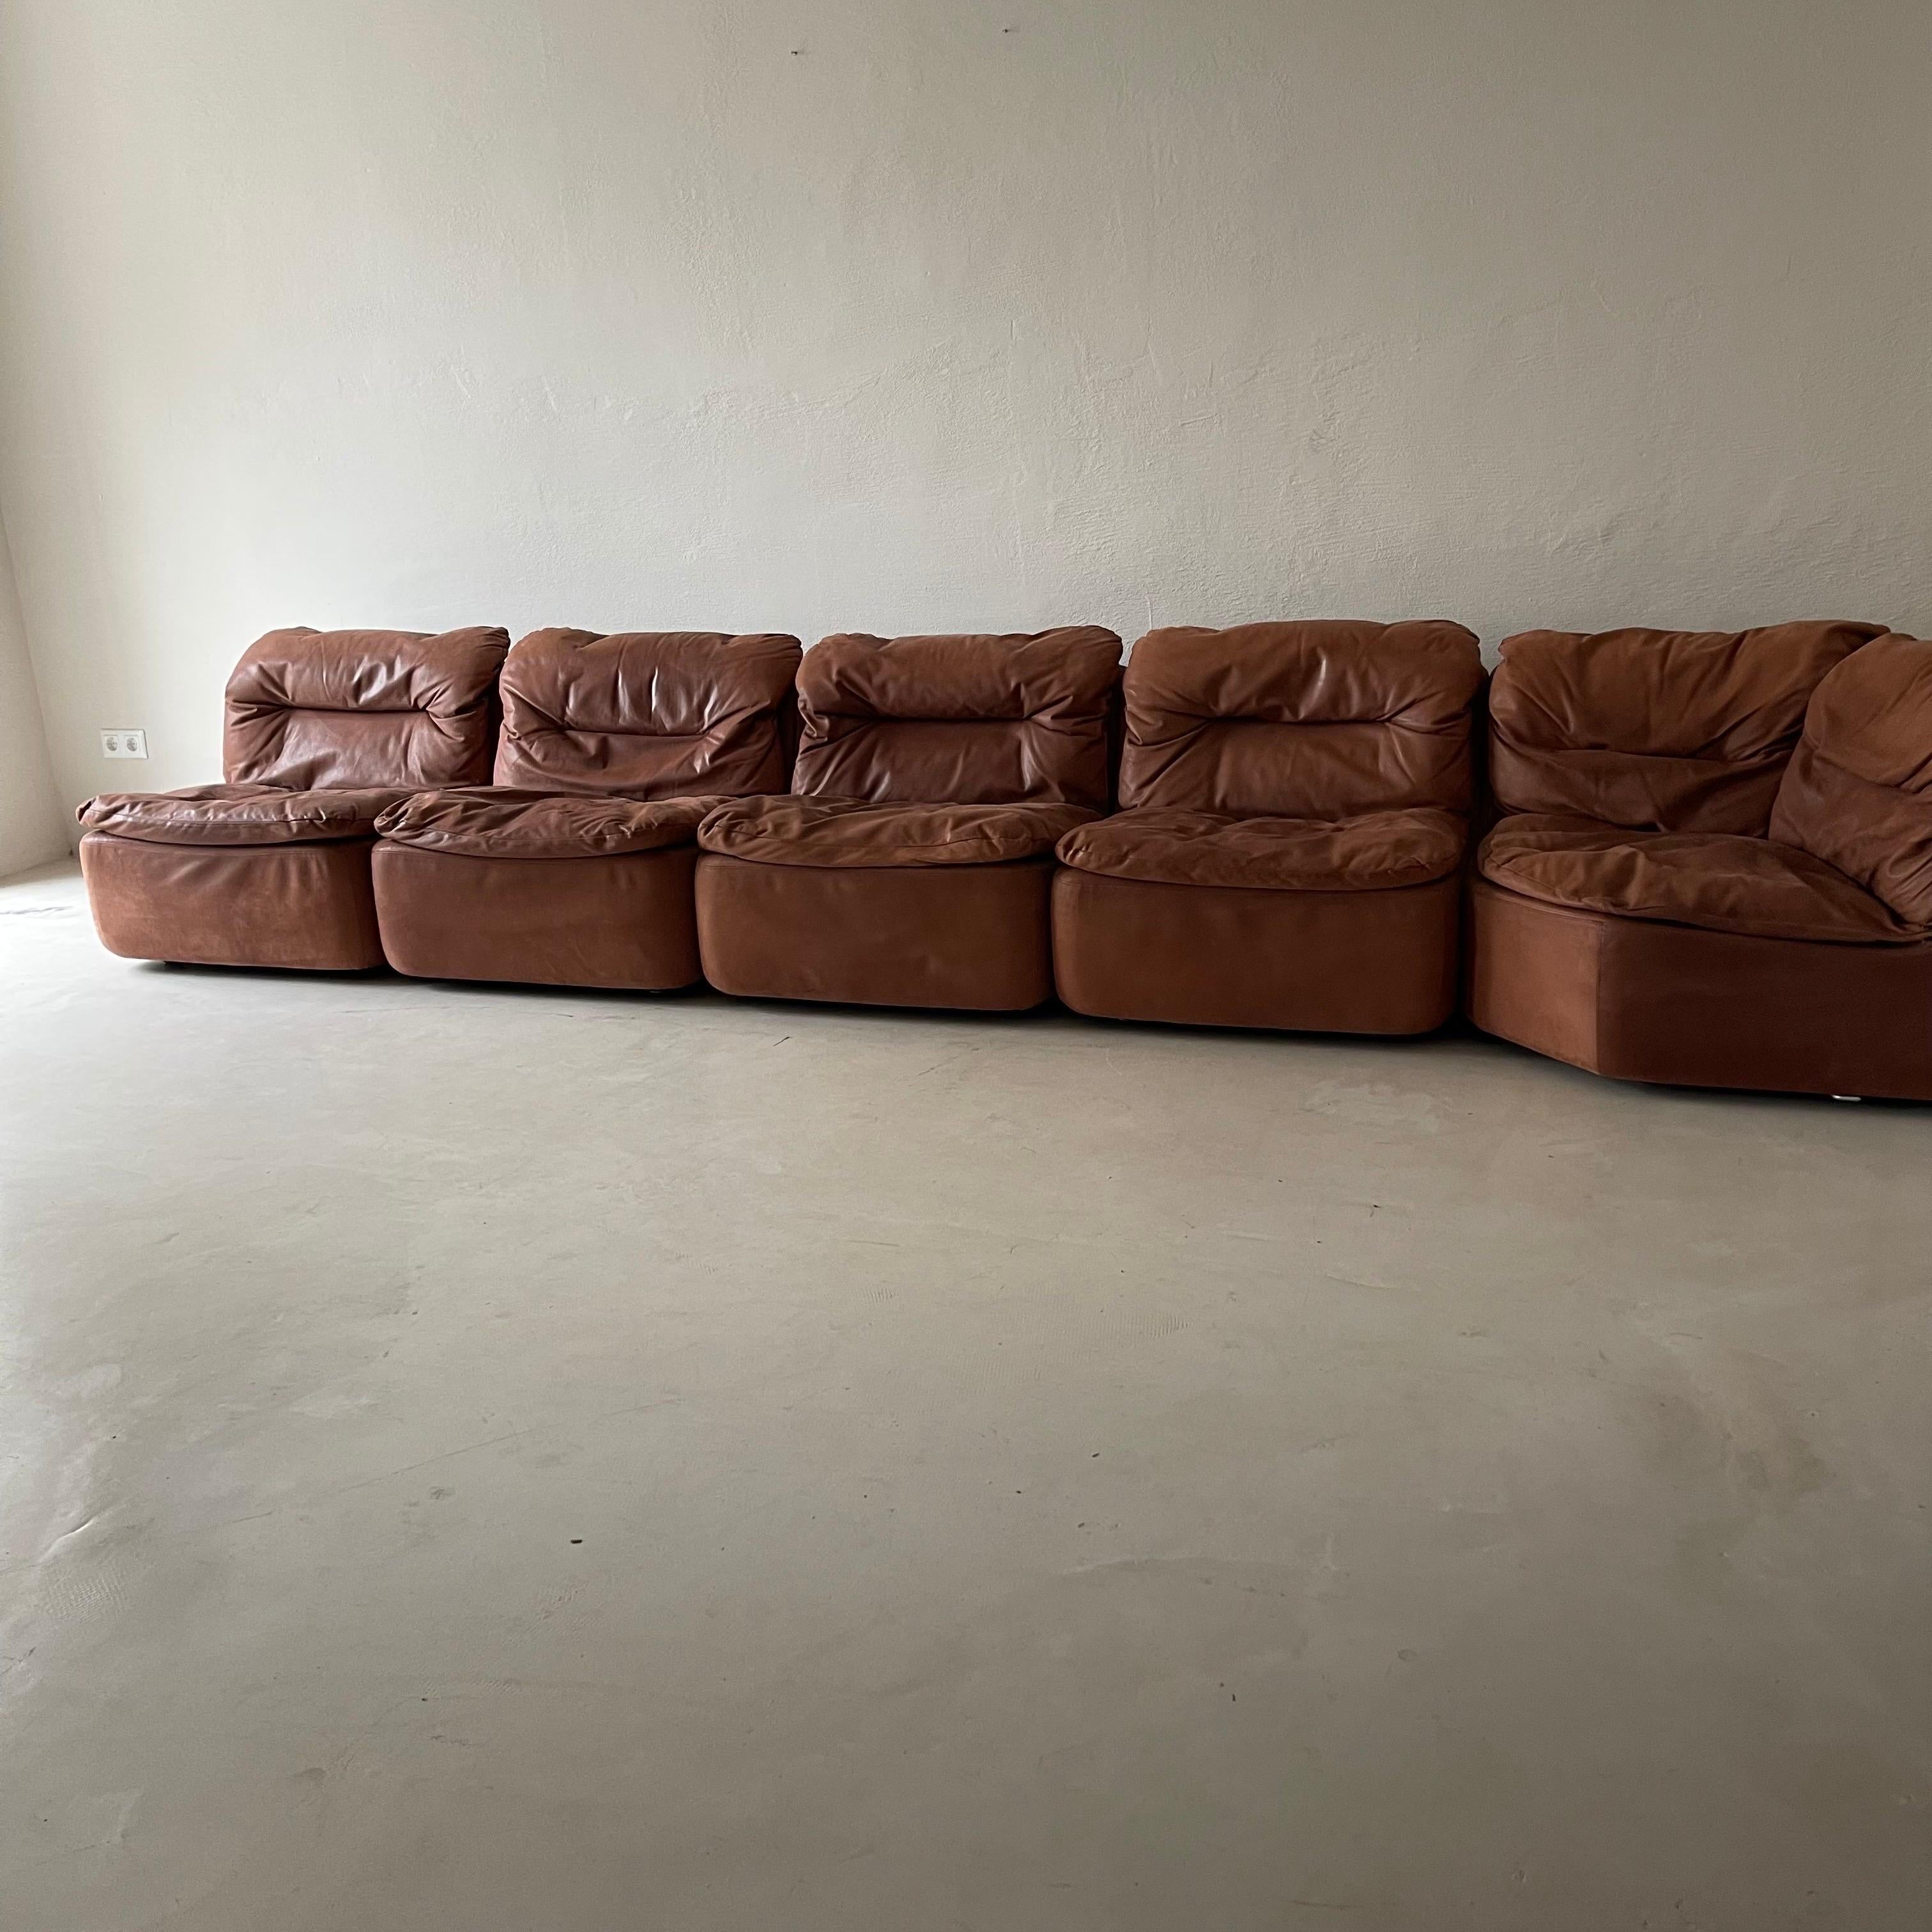 Vintage Modular Sofa by Friedrich Hill for Walter Knoll. Great comfort and style in very soft Terracotta colored leather with a fantastic 70s vibe that is so in demand right now. Can be placed as a straight, long sectional with curved unit at the